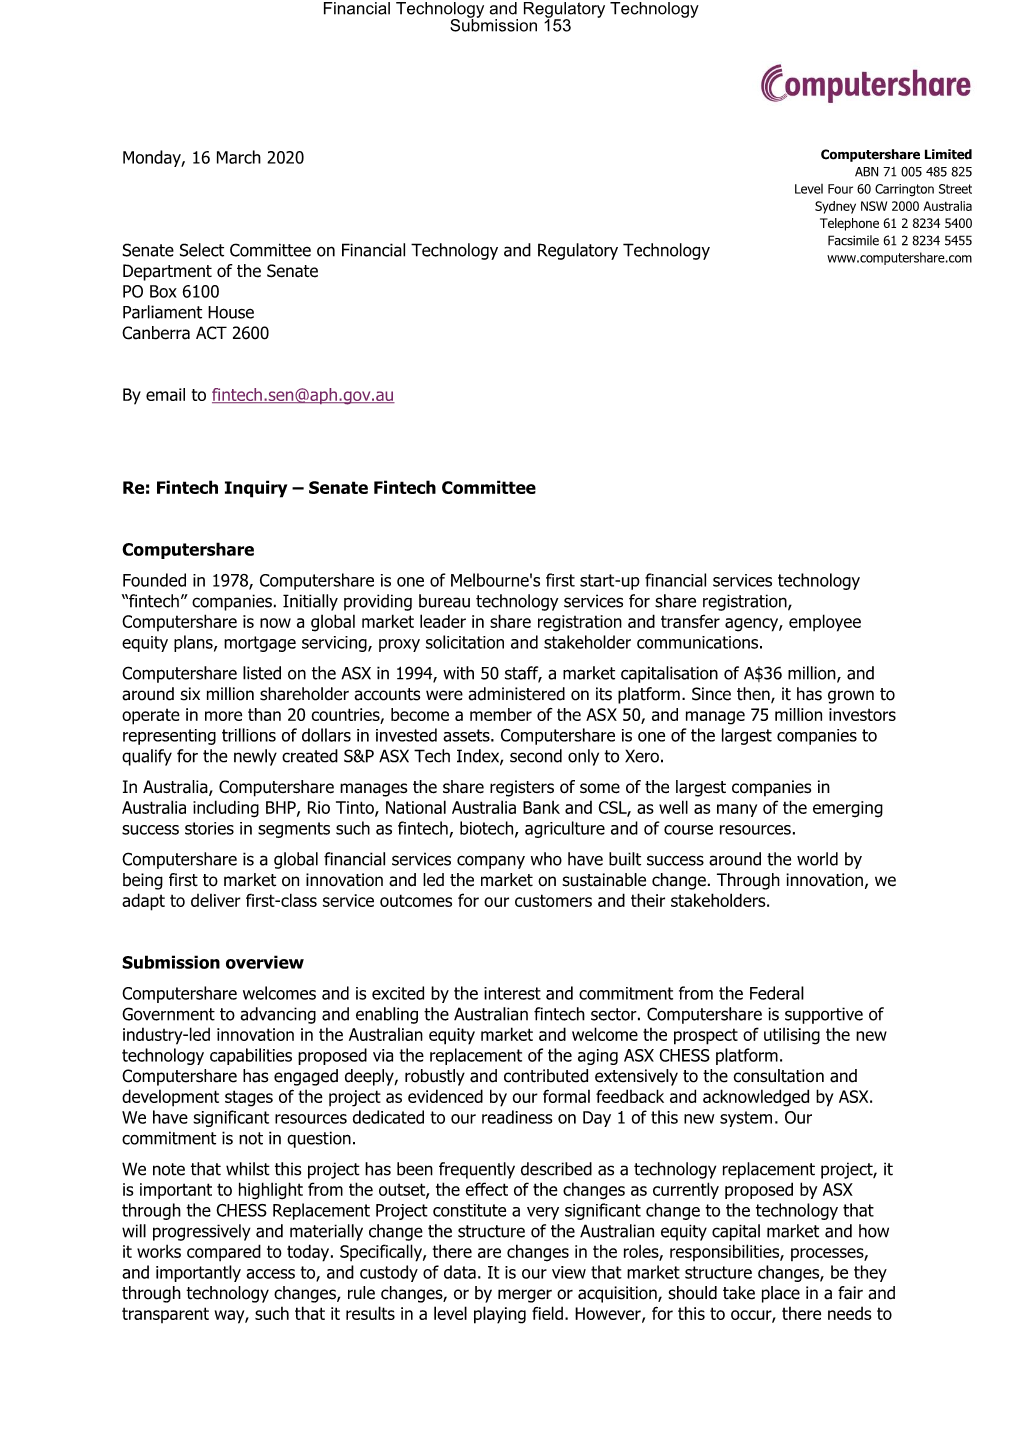 Financial Technology and Regulatory Technology Submission 153